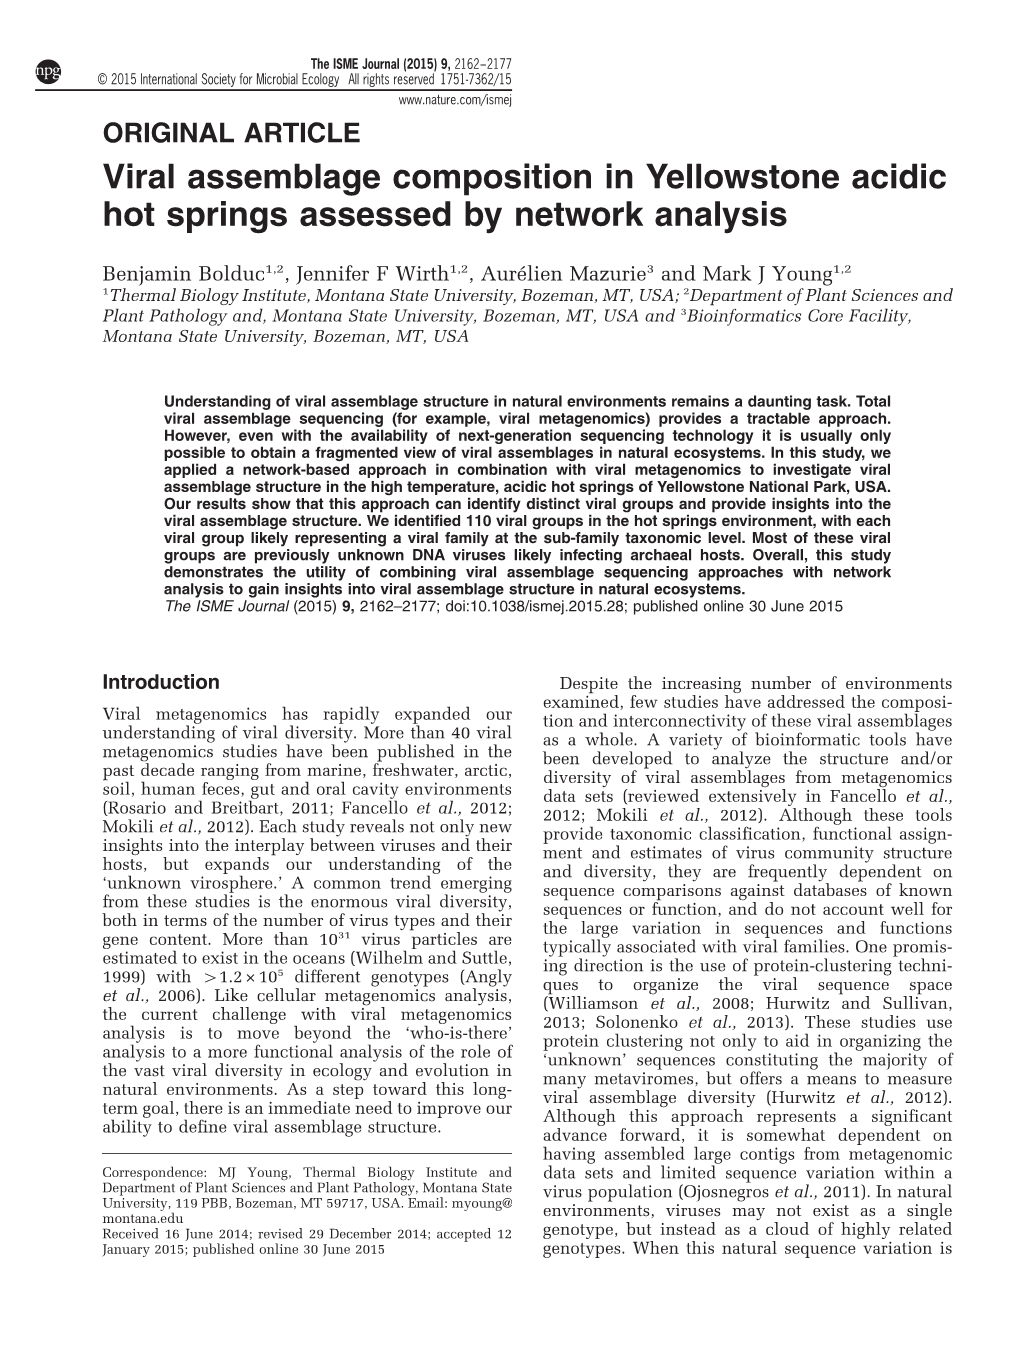 Viral Assemblage Composition in Yellowstone Acidic Hot Springs Assessed by Network Analysis